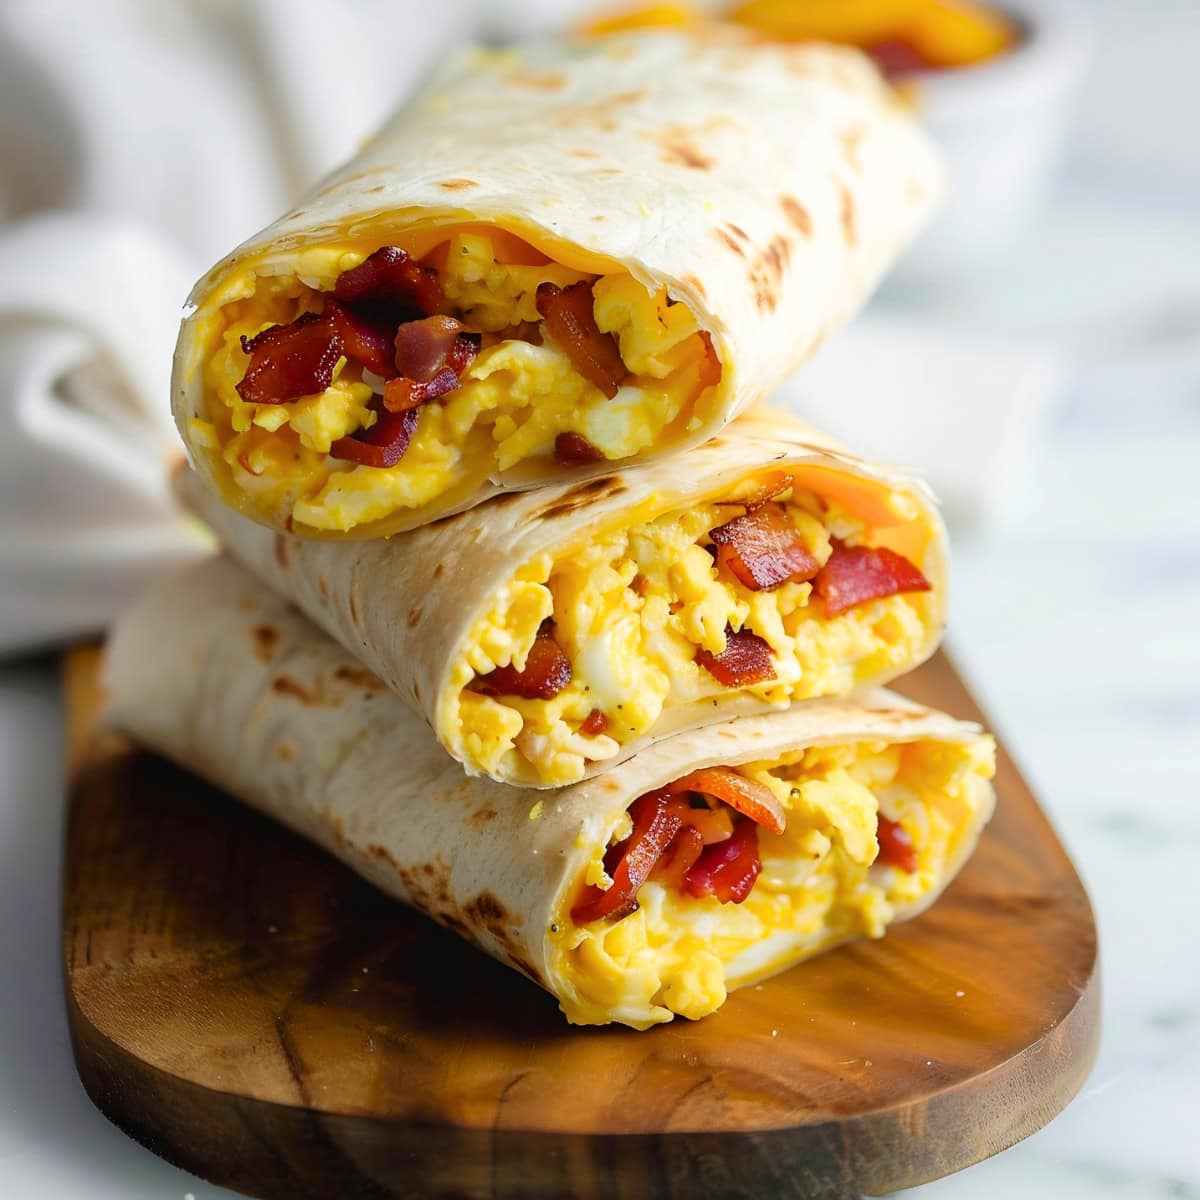 A breakfast wrap with bacon, egg and cheese on a wooden board.